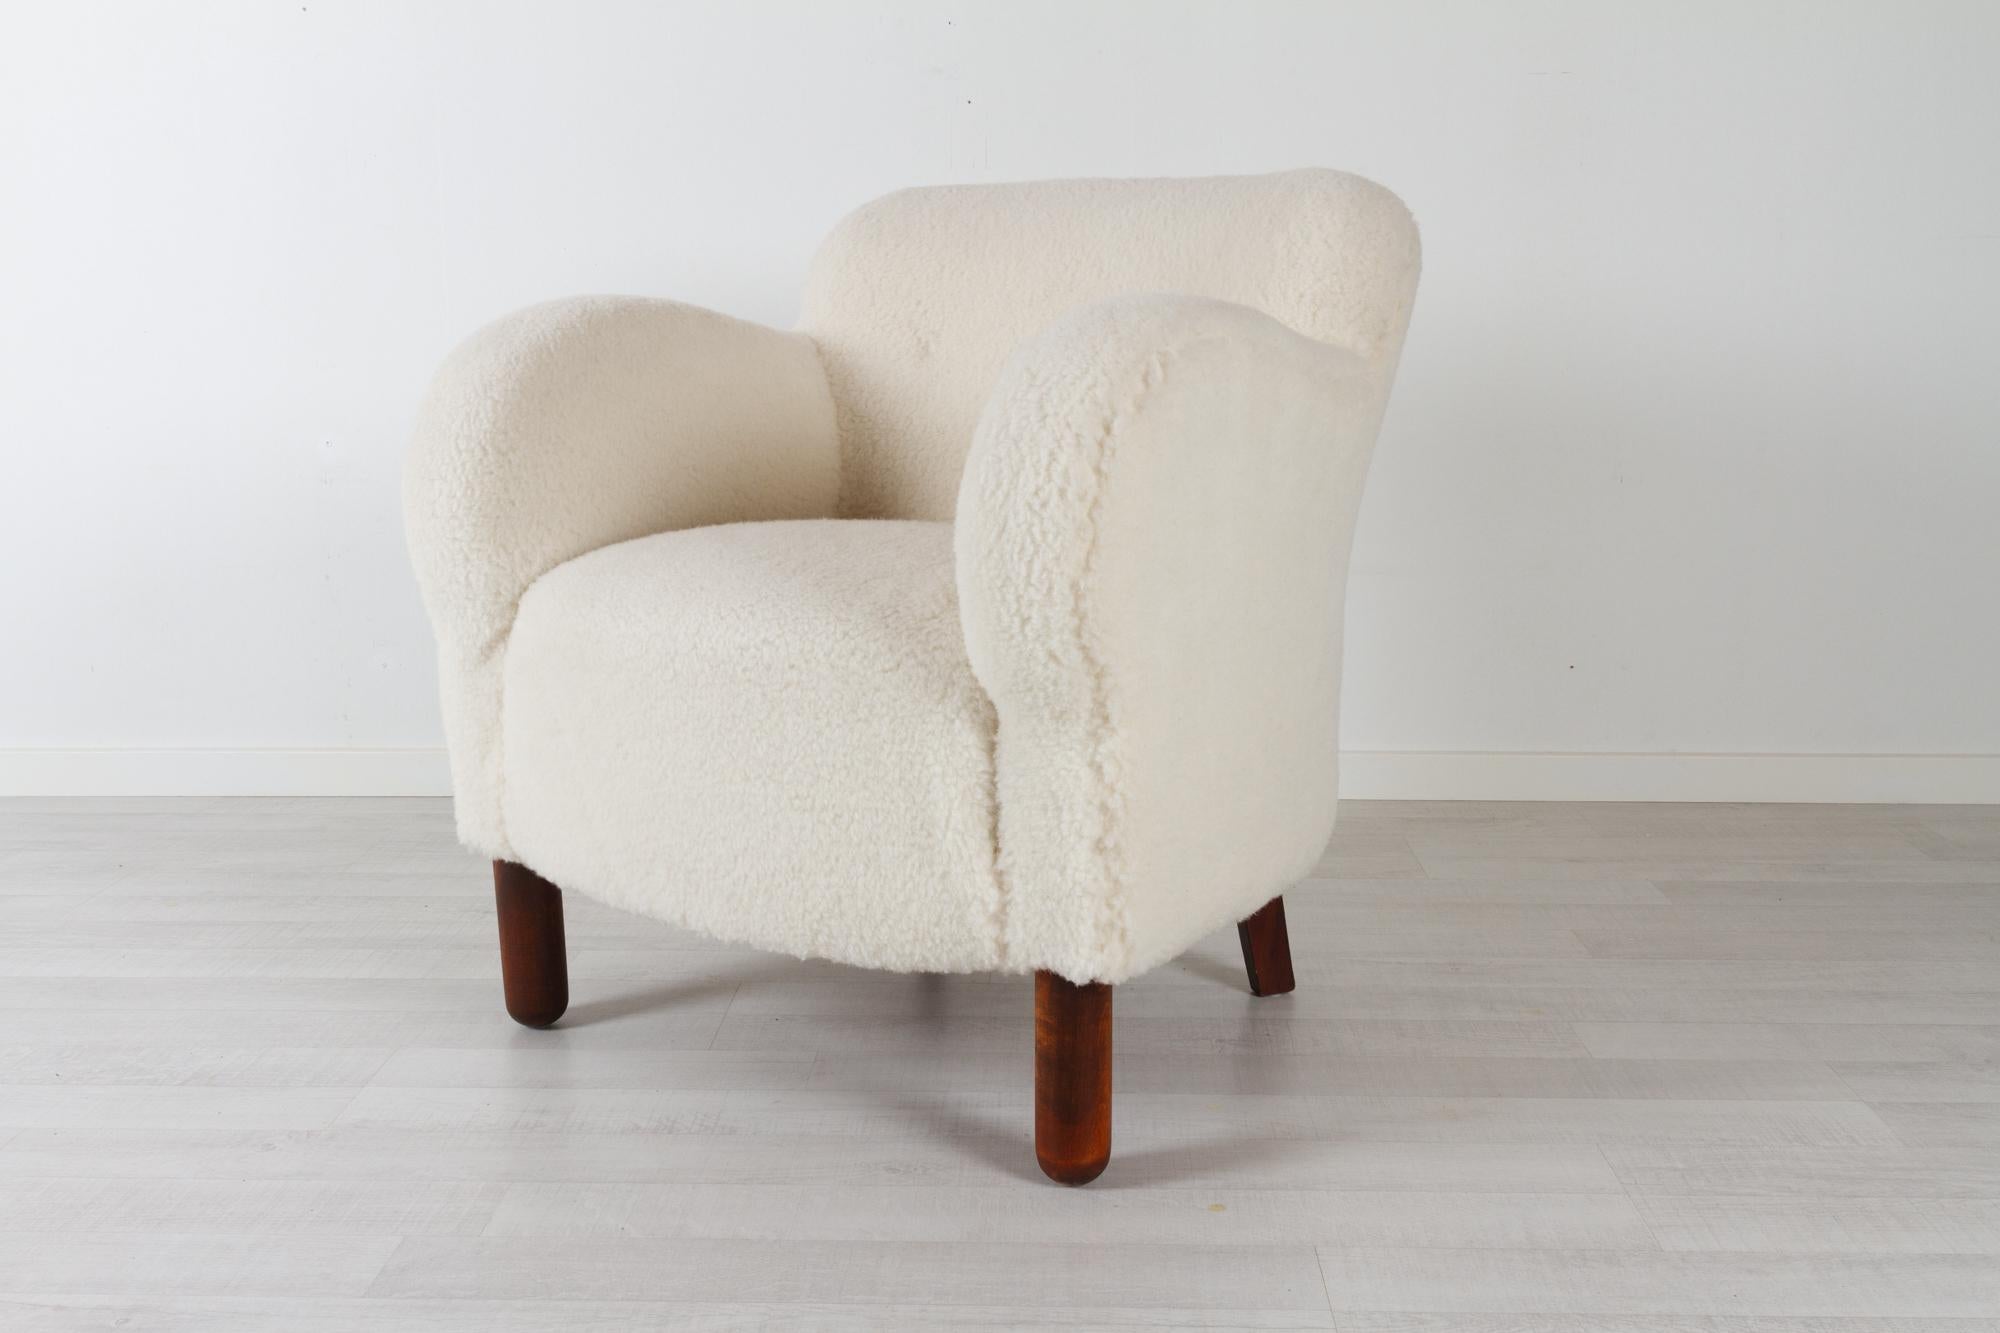 Vintage Danish Lambswool Lounge chair 1940s
Danish Mid-century modern armchair reupholstered in off white lambswool. Wide curved back and large rounded armrests. Thick round front legs.
Very soft and cosy teddy bear styled chair. Organic and